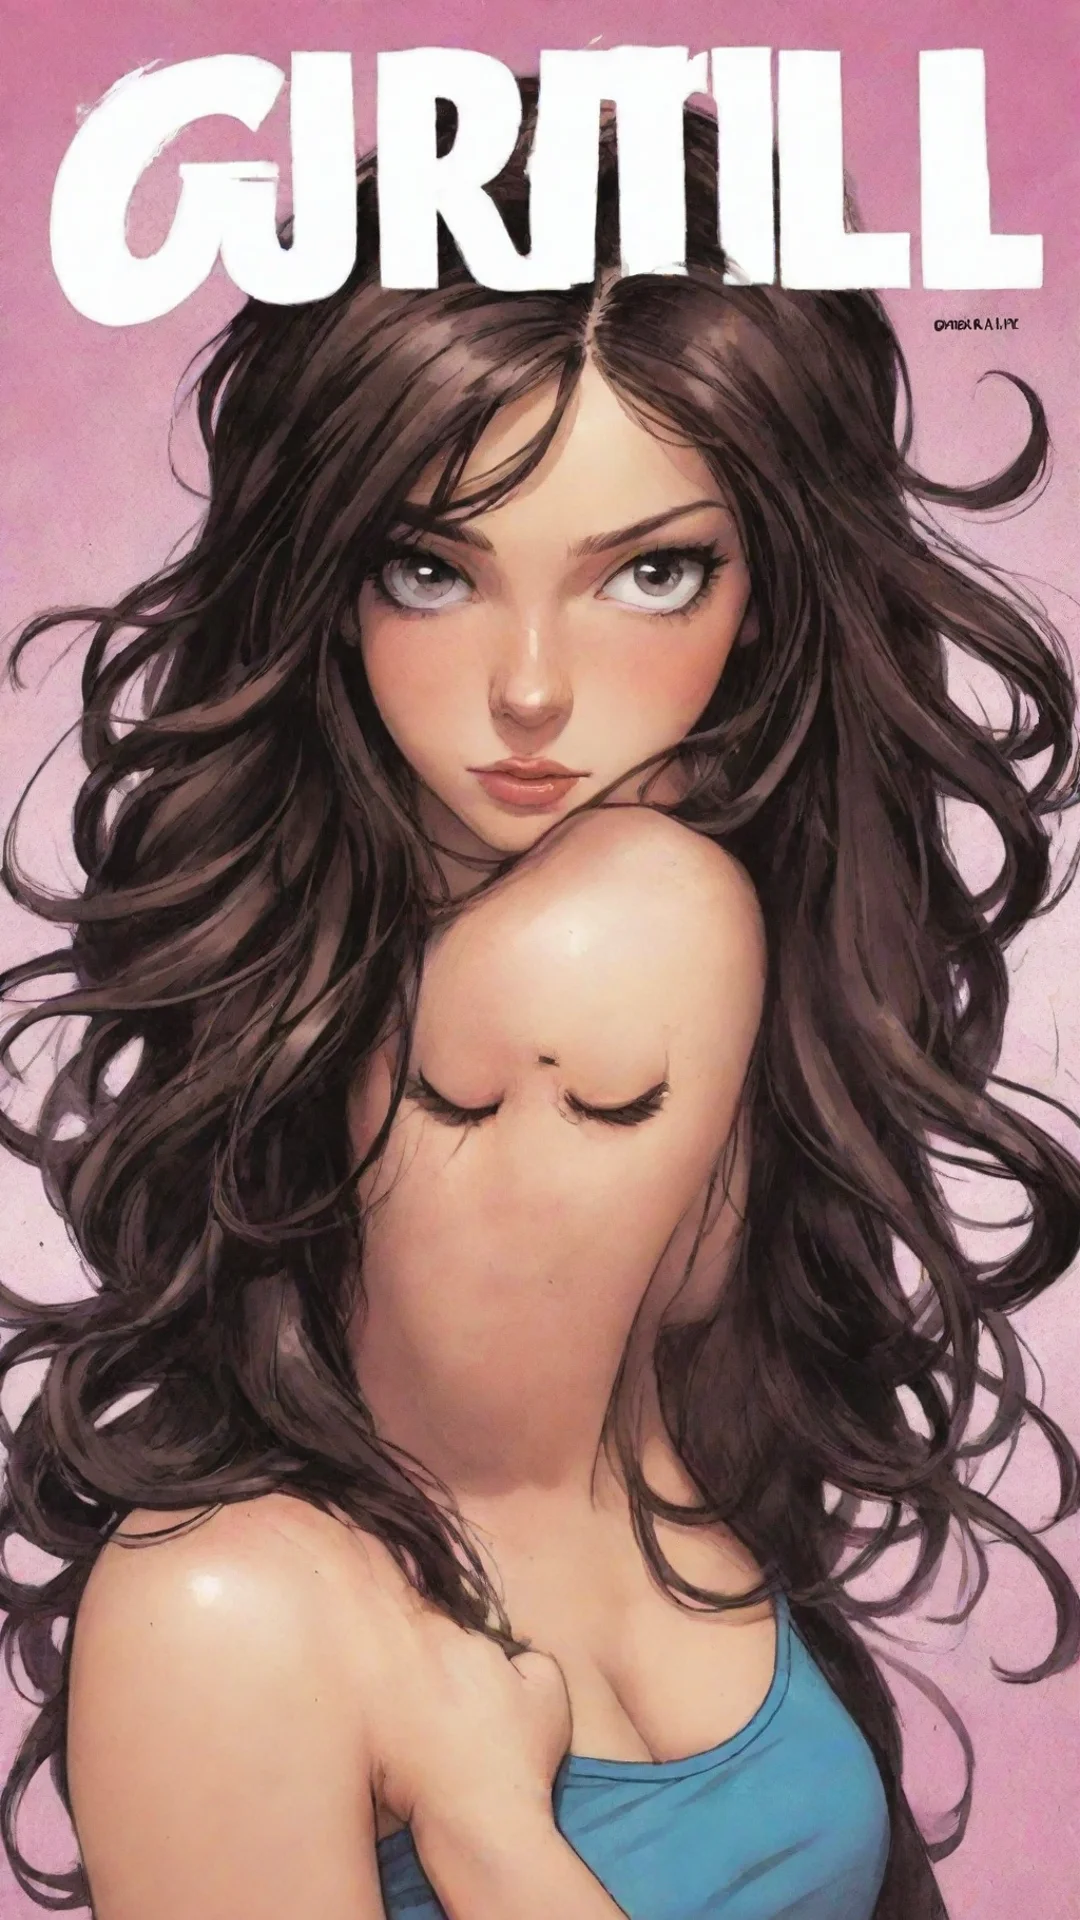 amazing girl comic cover awesome portrait 2 tall